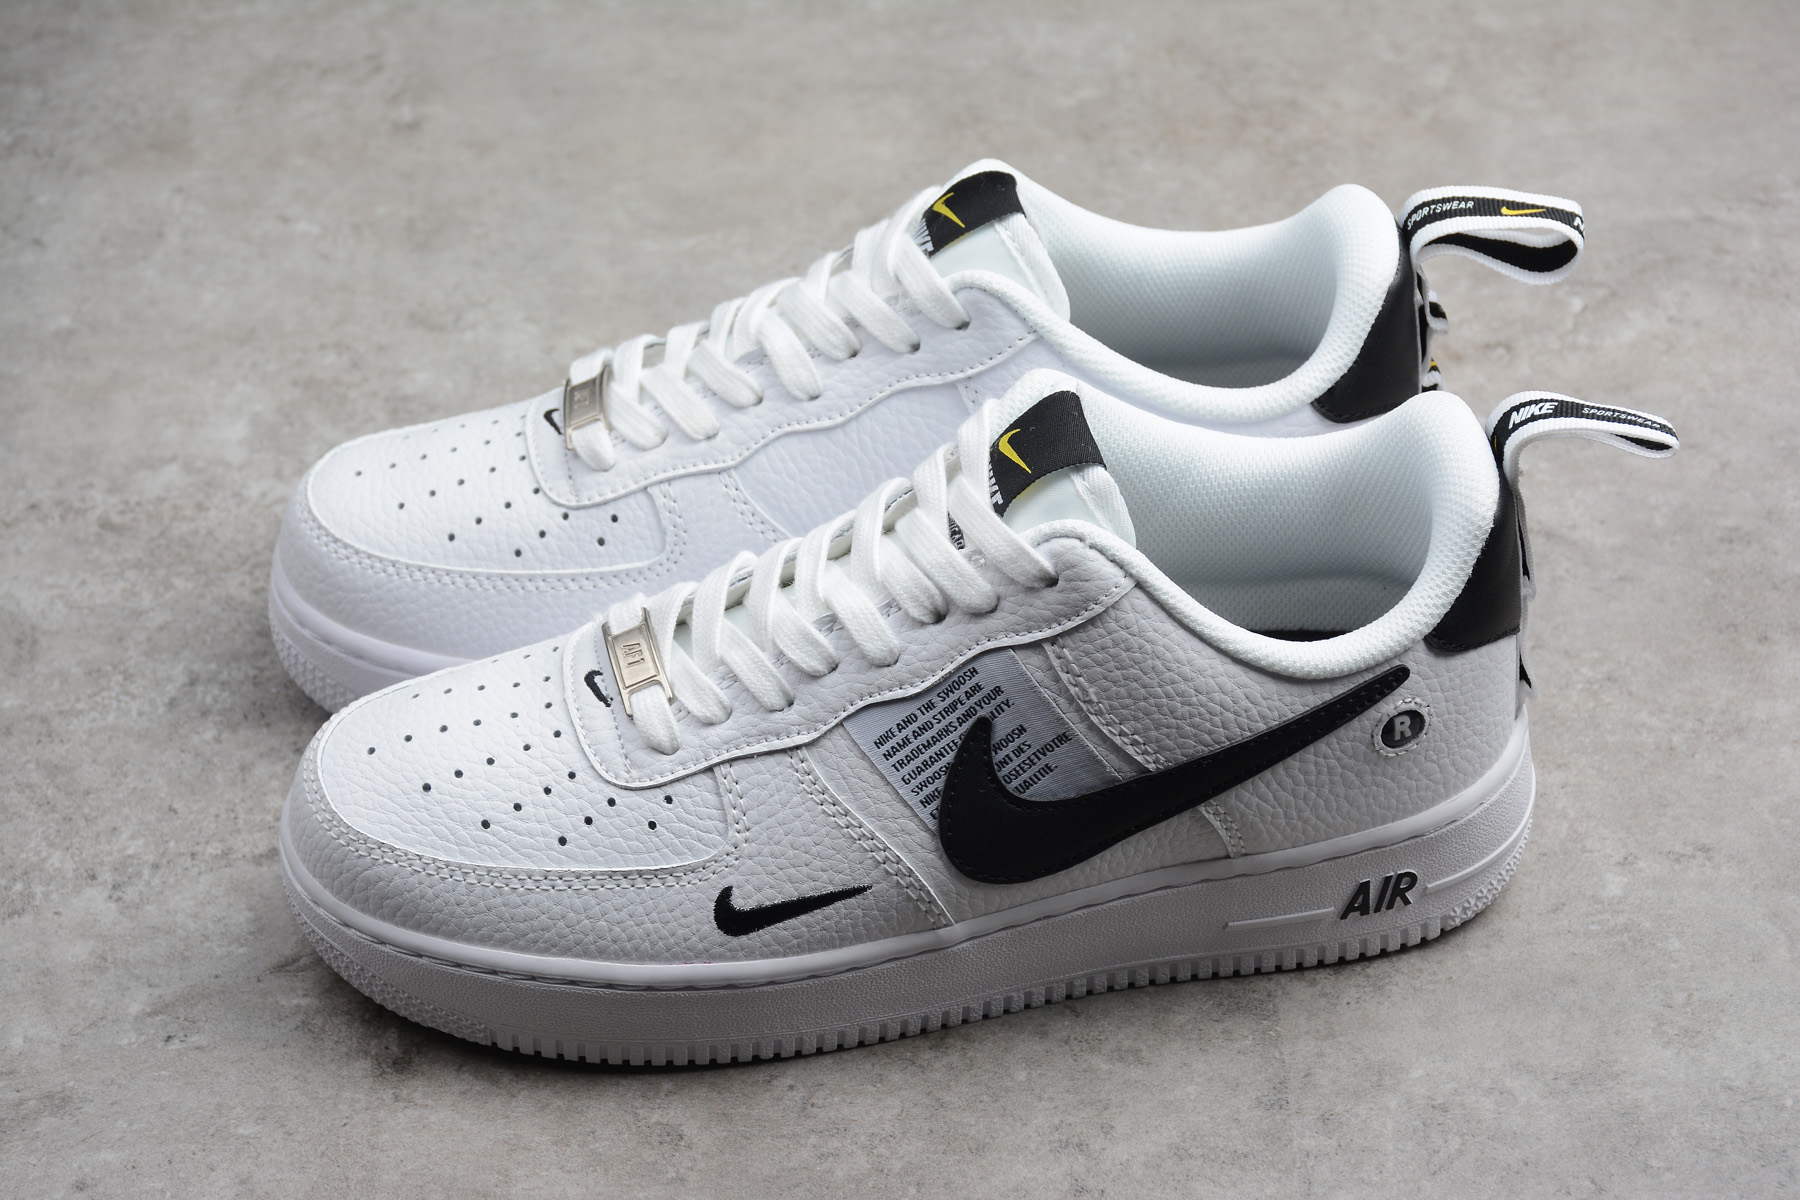 Now Available: Nike Air Force 1 Low Utility 